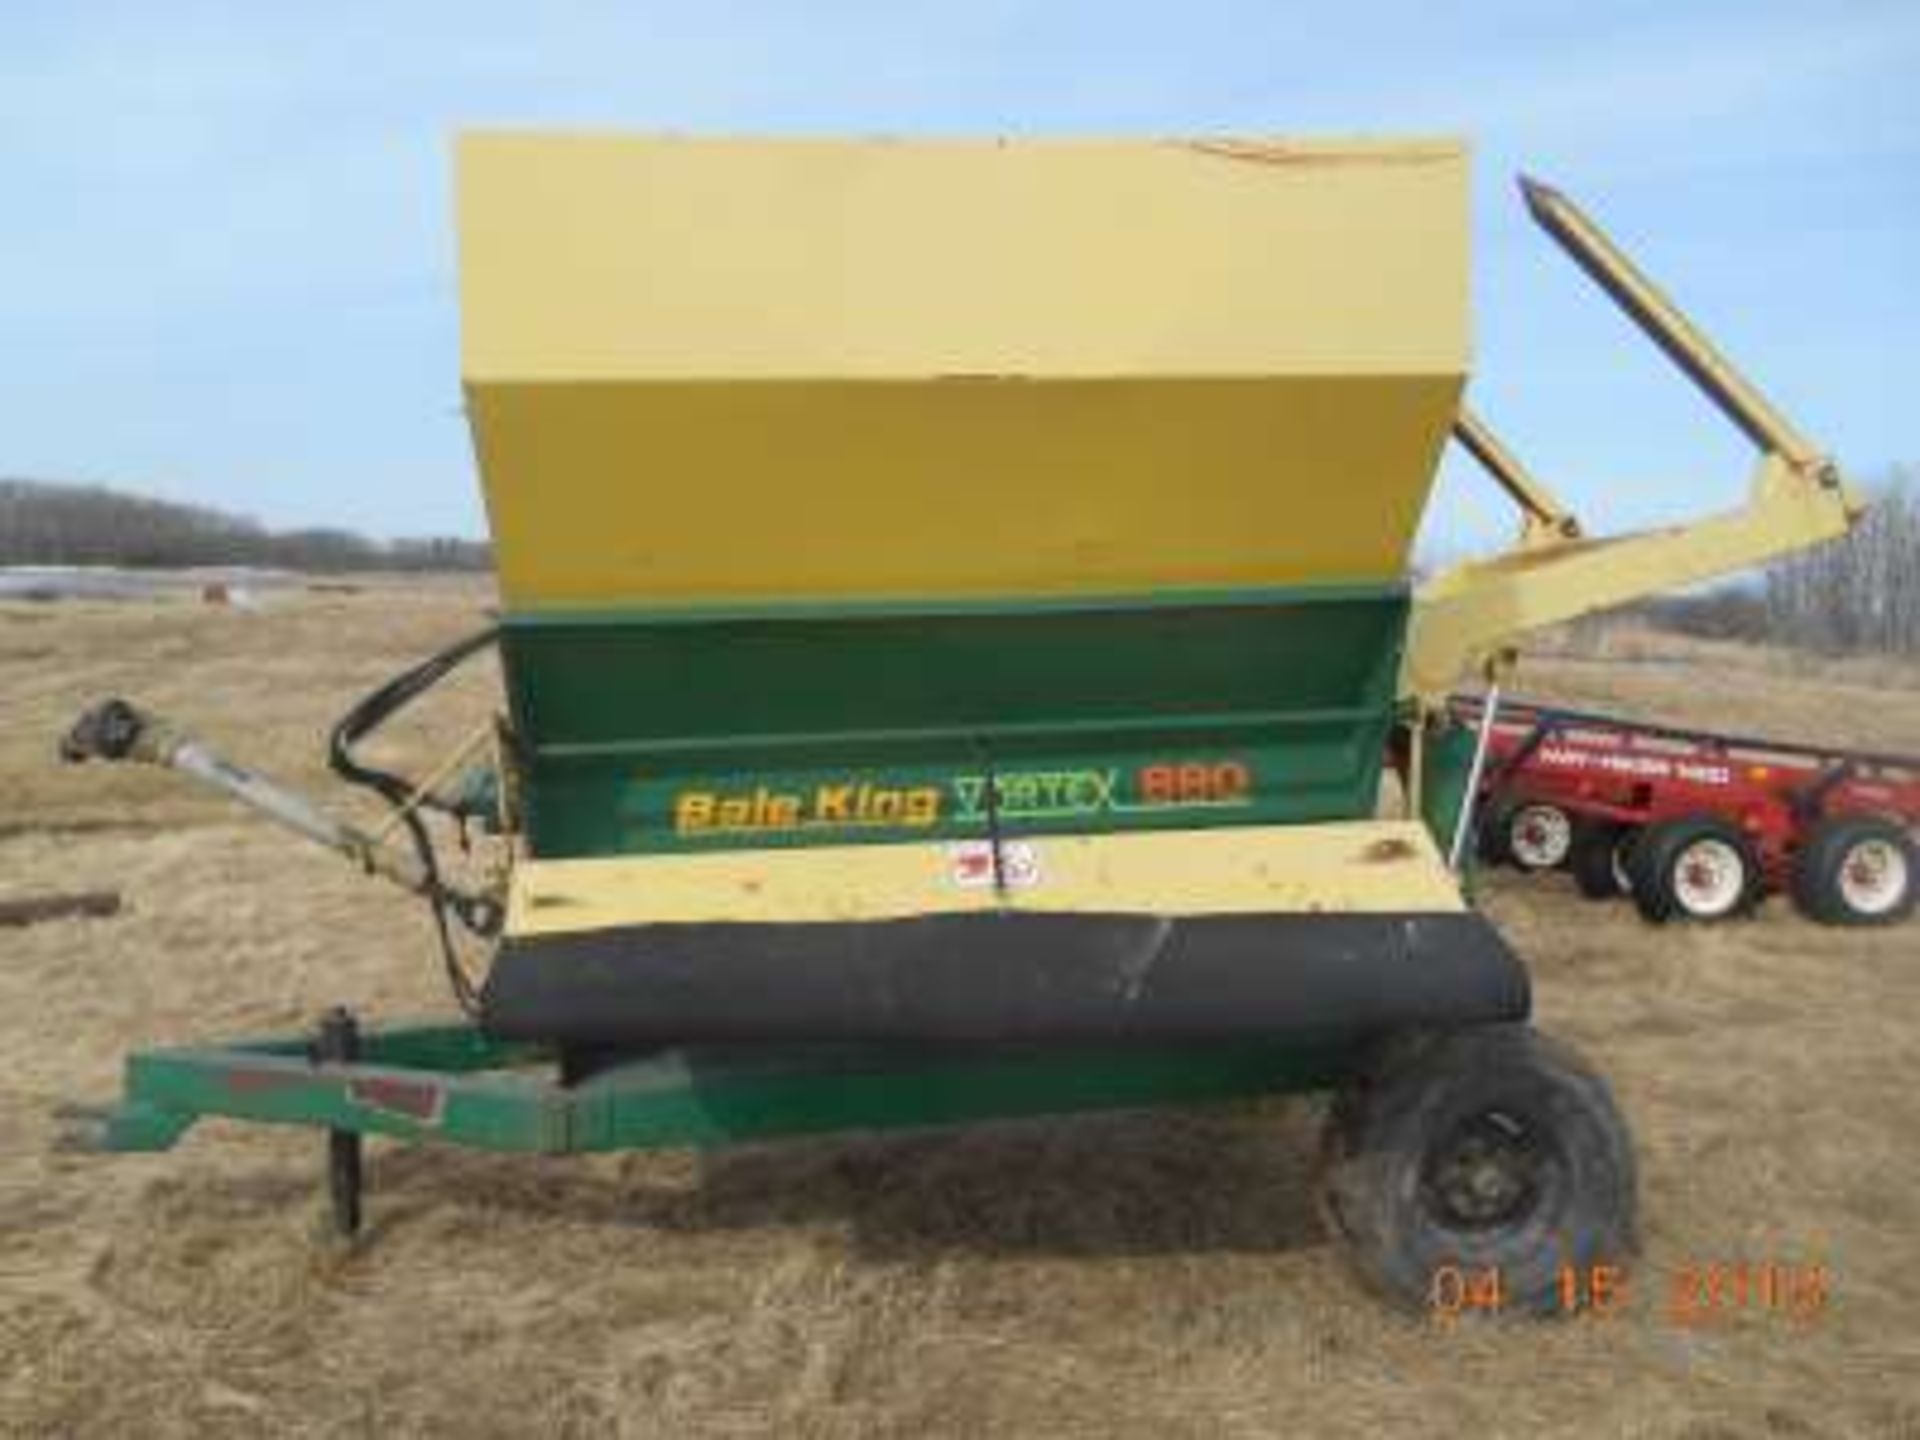 1998 bale king round bale processor( excellent condition) serial number 18737: model Vortex 880, - Image 3 of 3